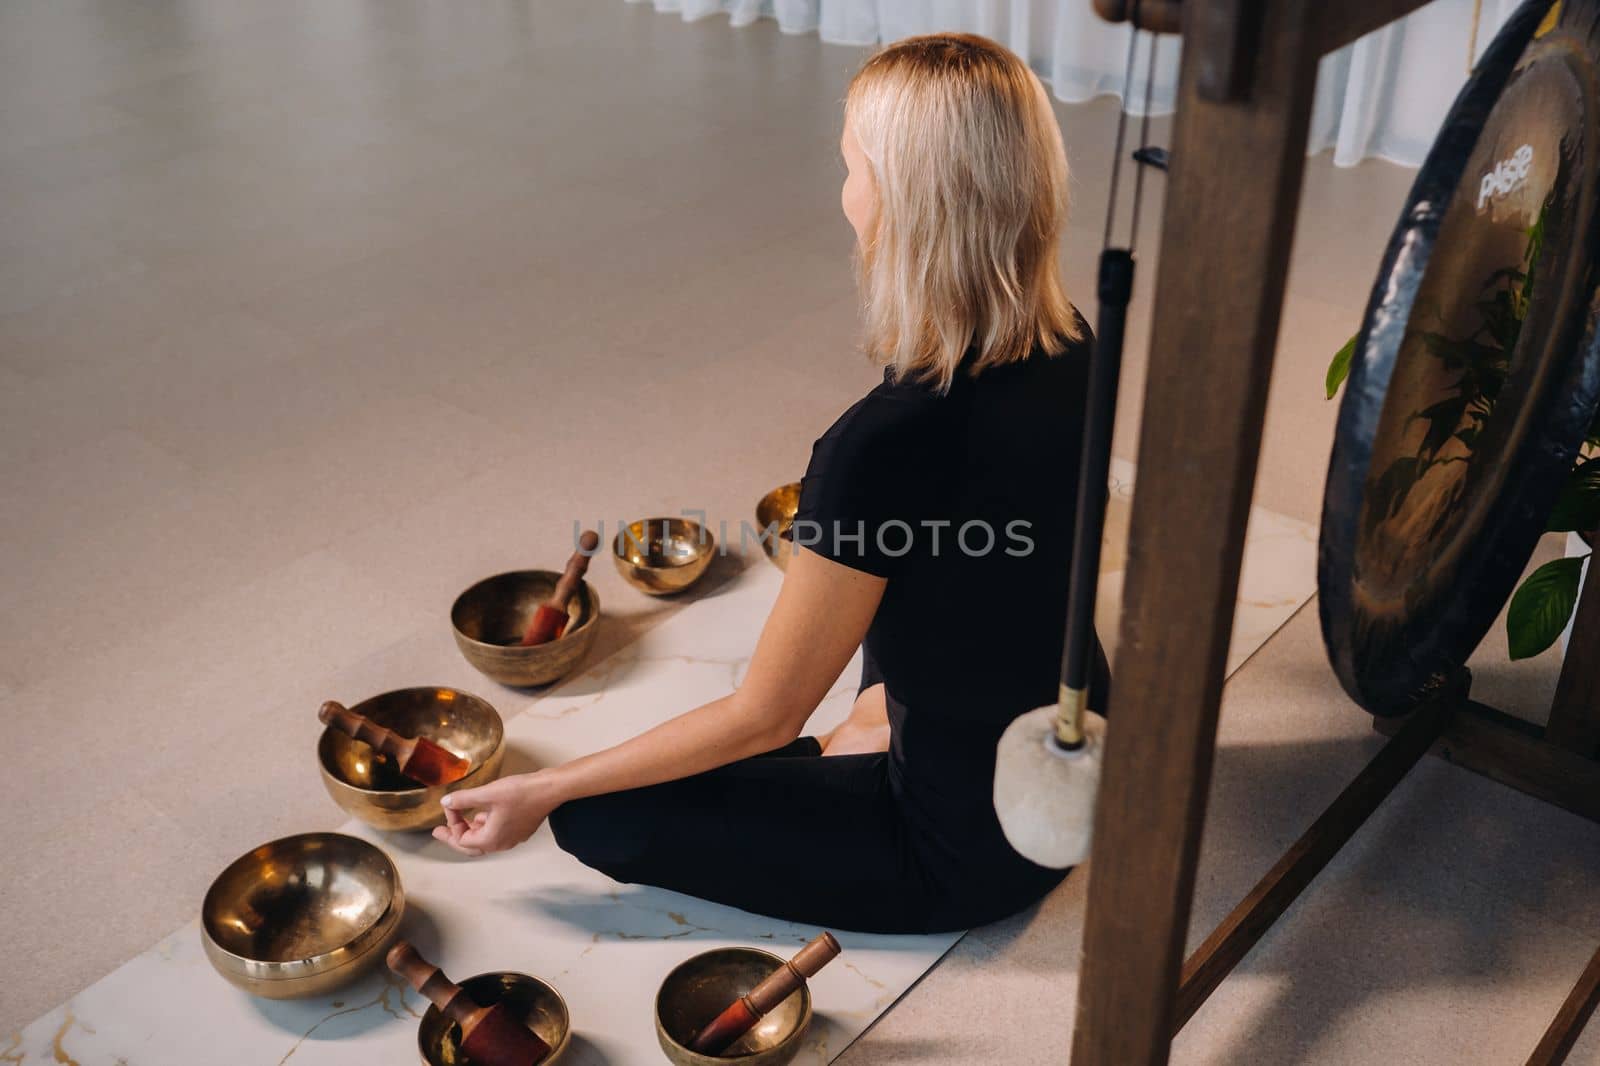 A woman sits in a lotus position next to Tibetan bowls, sitting on a yoga mat against the background of a gong.